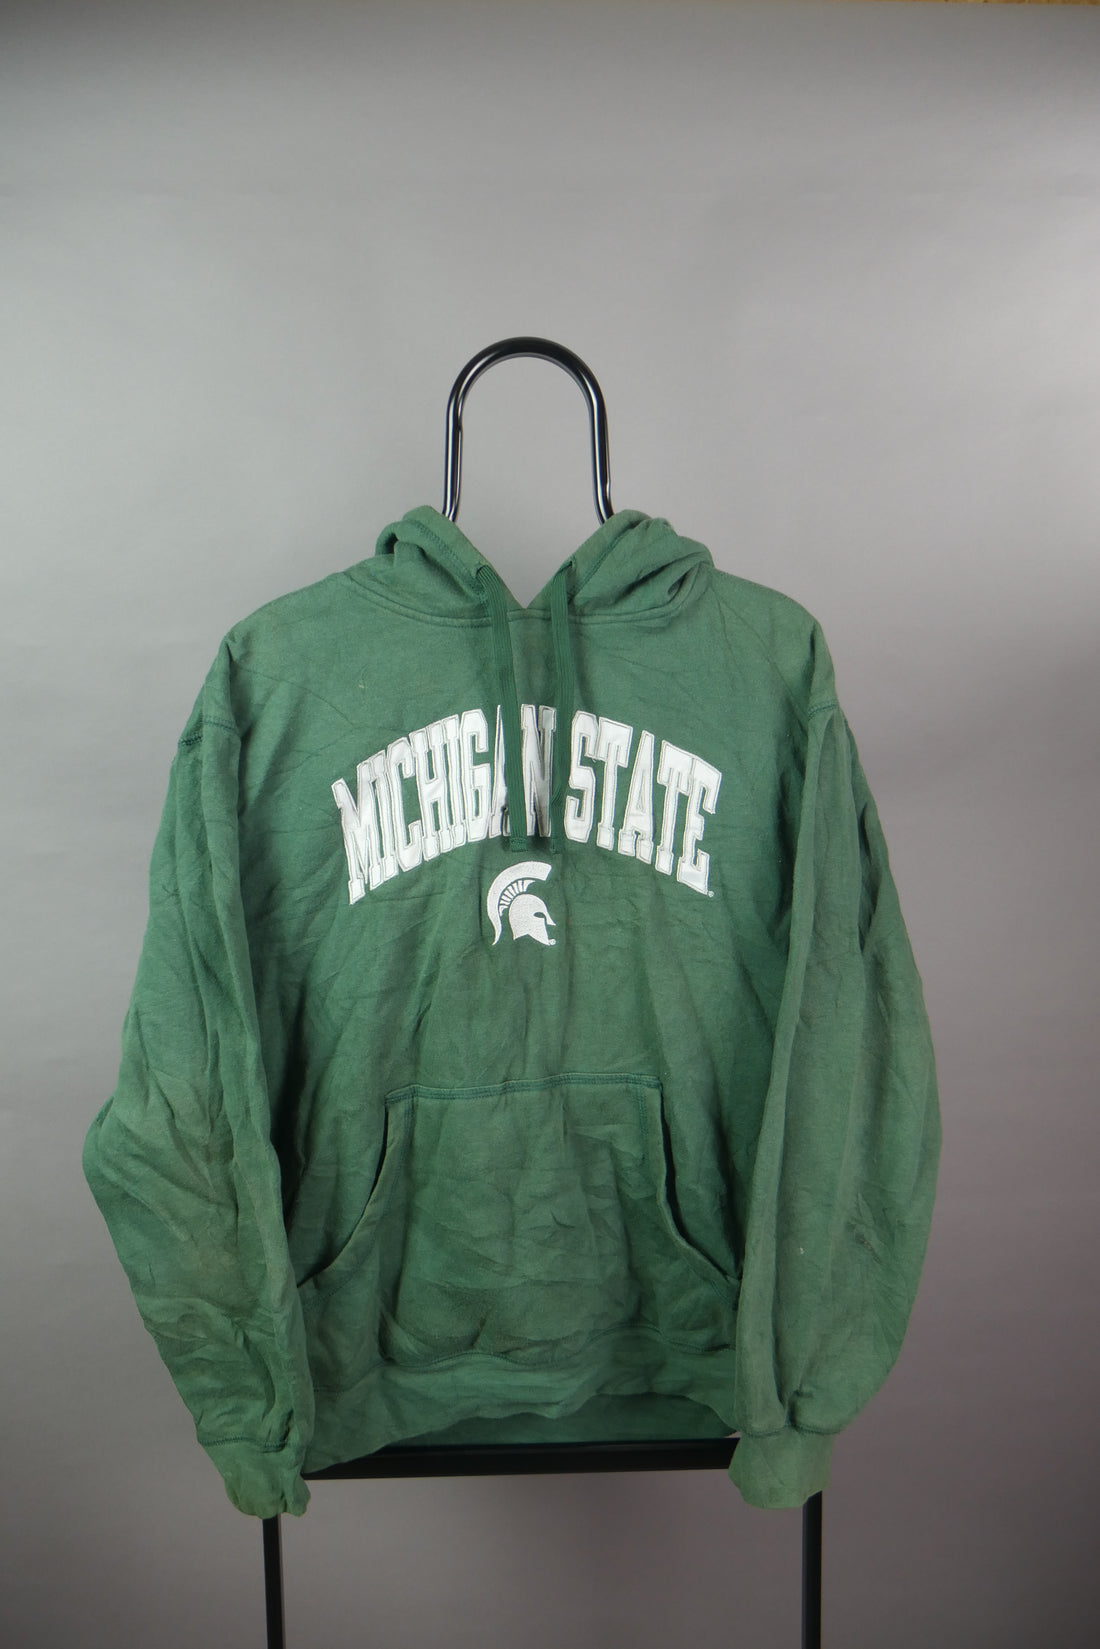 The Champion Michigan State Embroidered Hoodie (L)